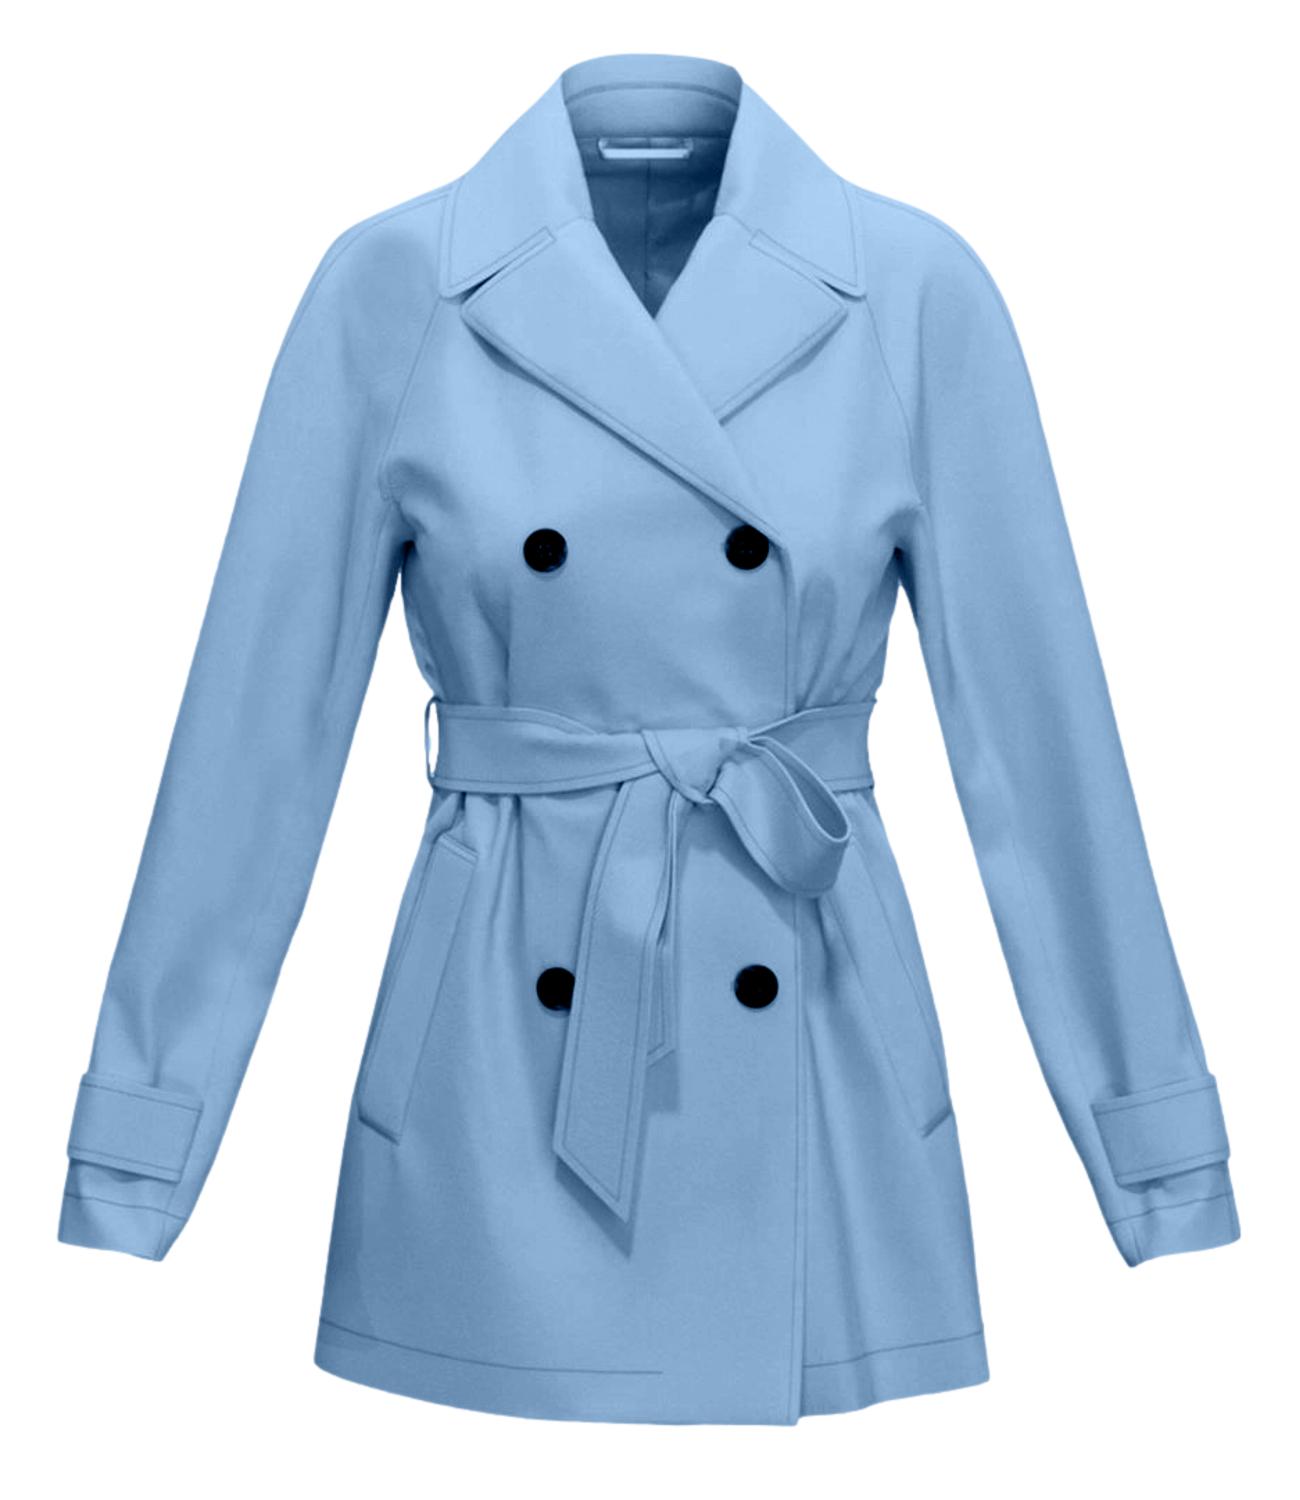 Impermeabile/trench WEST azzurro donna